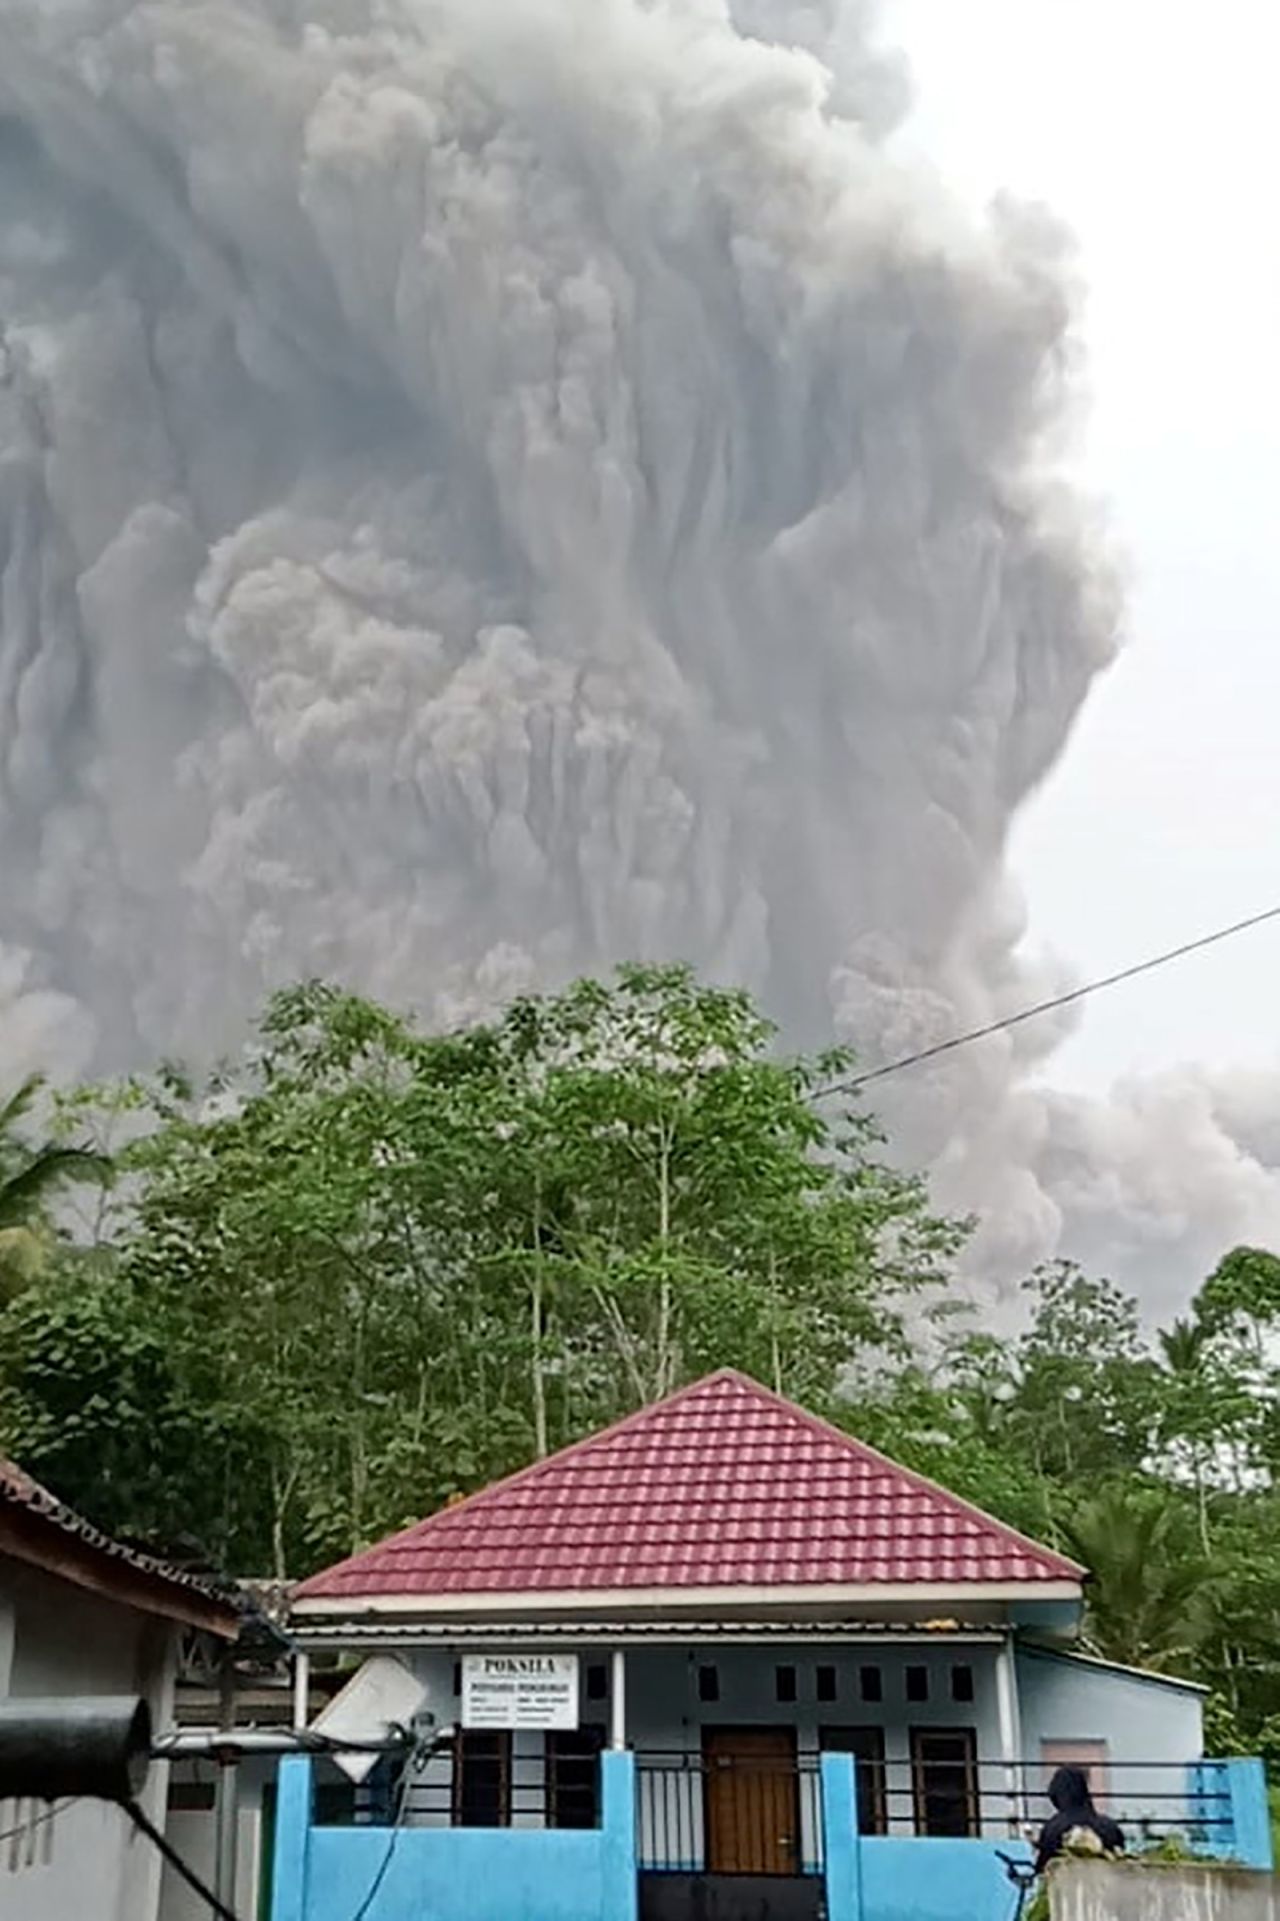 Mount Semeru spews volcanic ash on Saturday. Indonesia sits between two continental plates on what is known as the Ring of Fire, a band around the basin of the Pacific Ocean that leads to high levels of tectonic and volcanic activity.